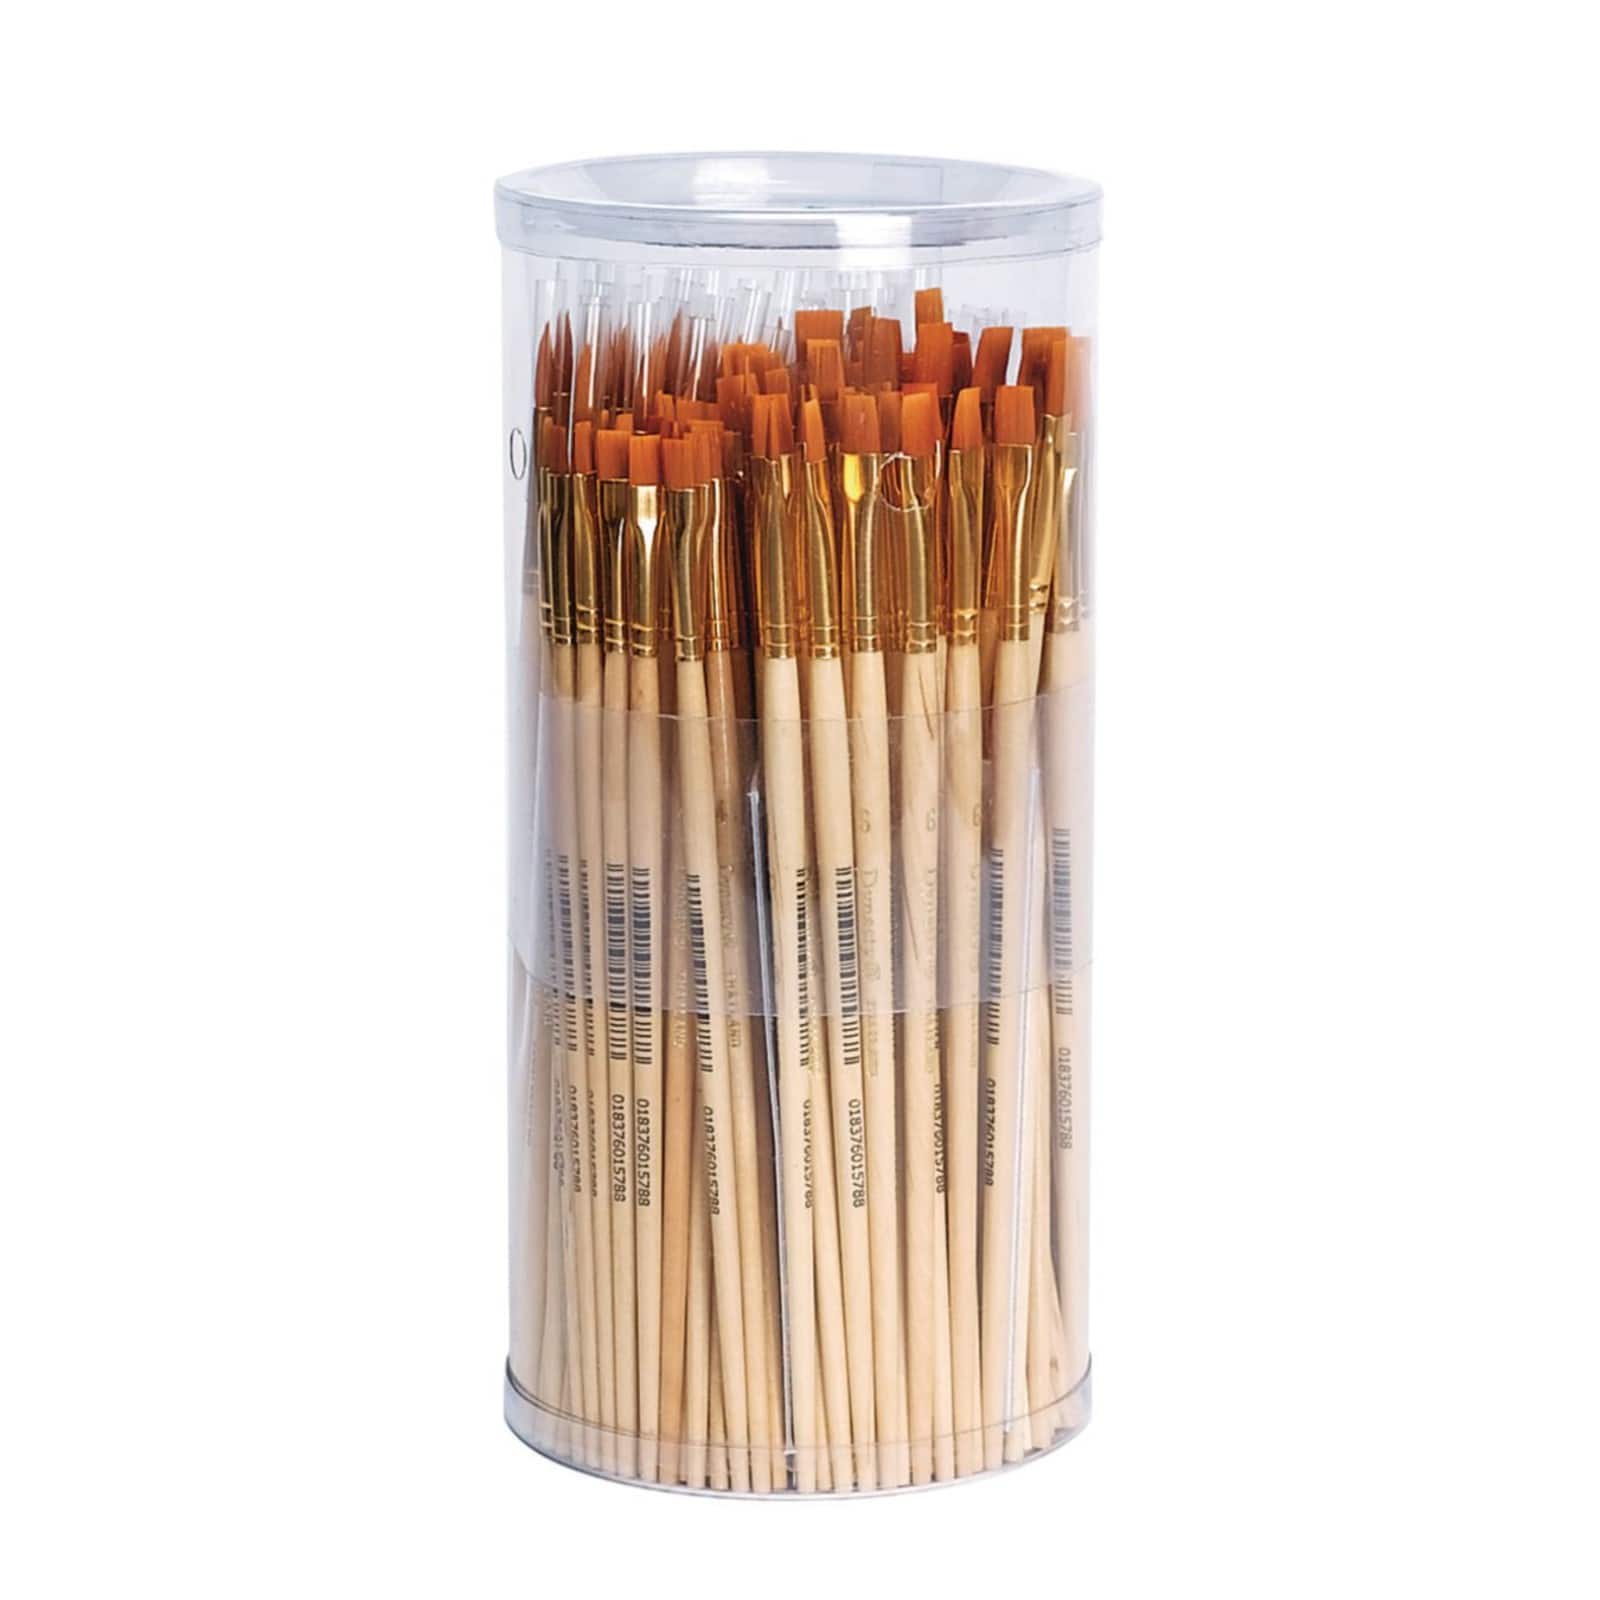 20-count color tipped artist brushes, Five Below